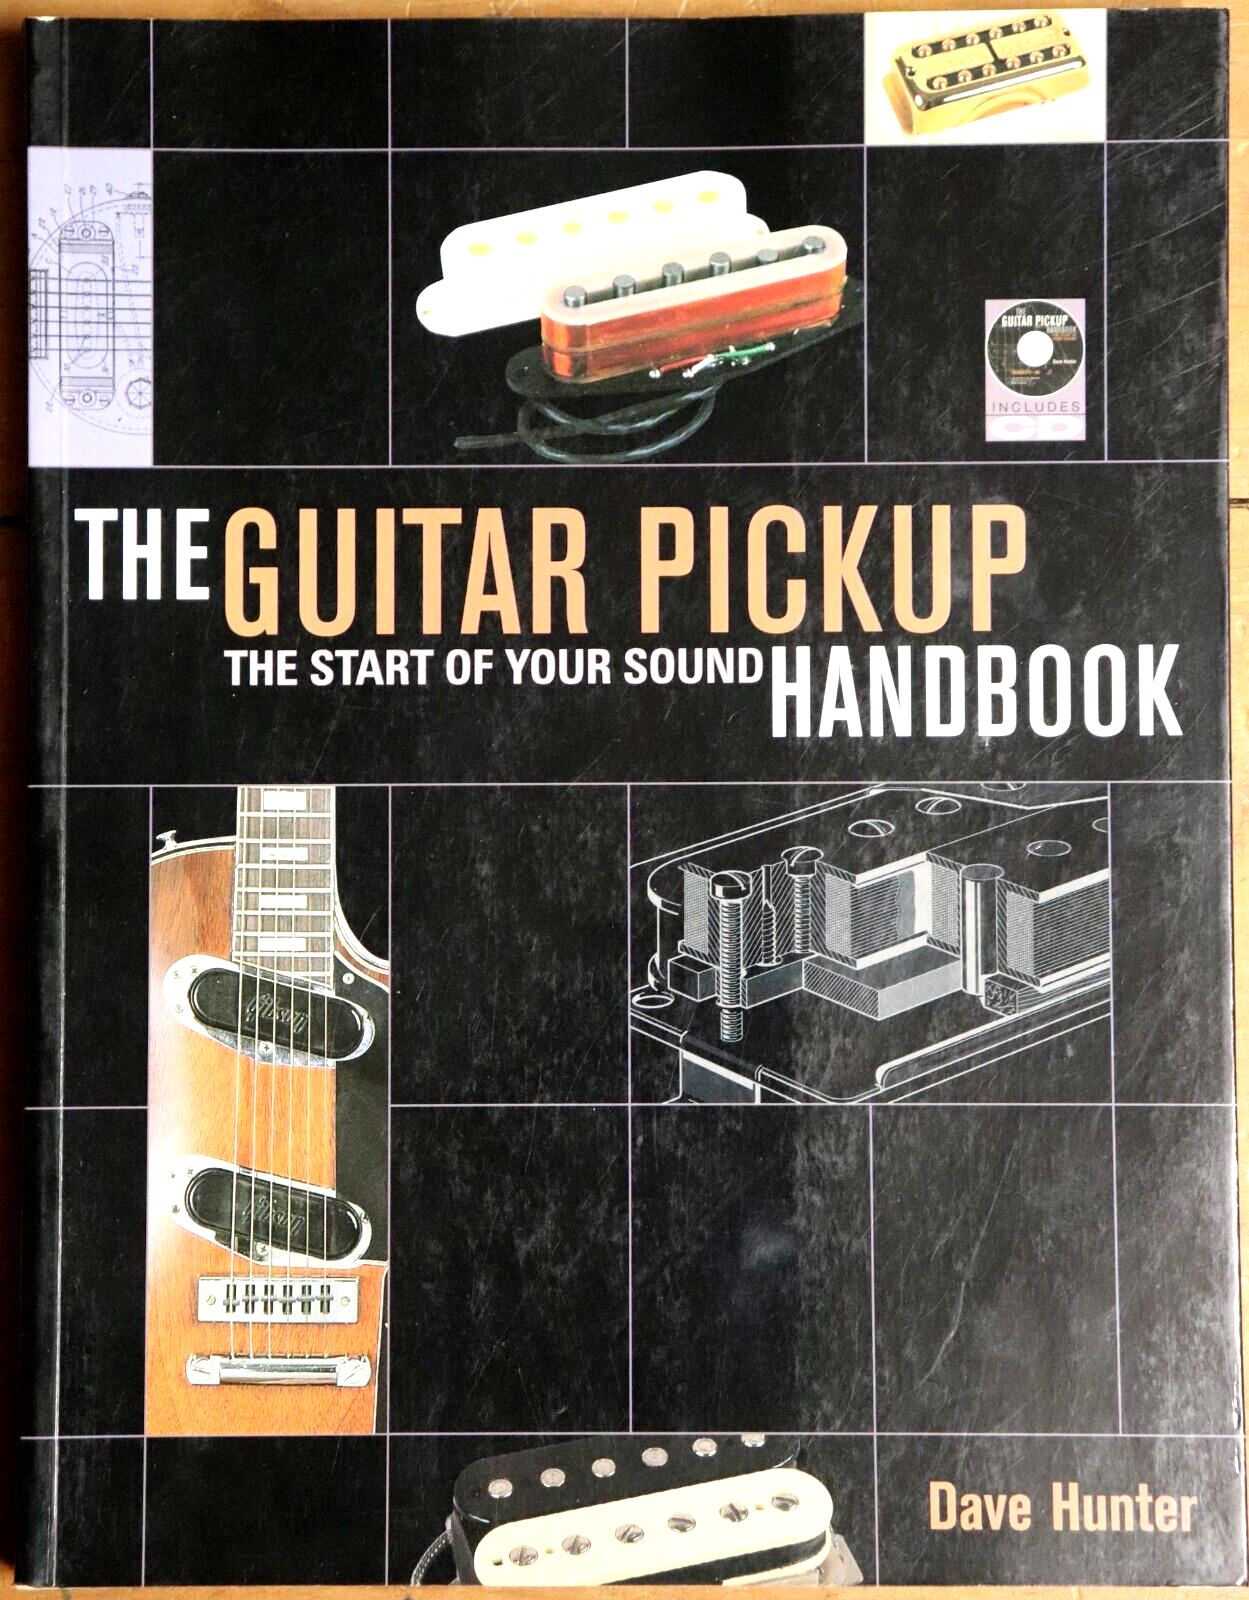 The Guitar Pickup Handbook by Dave Hunter  - 2008 - Guitar Reference Book